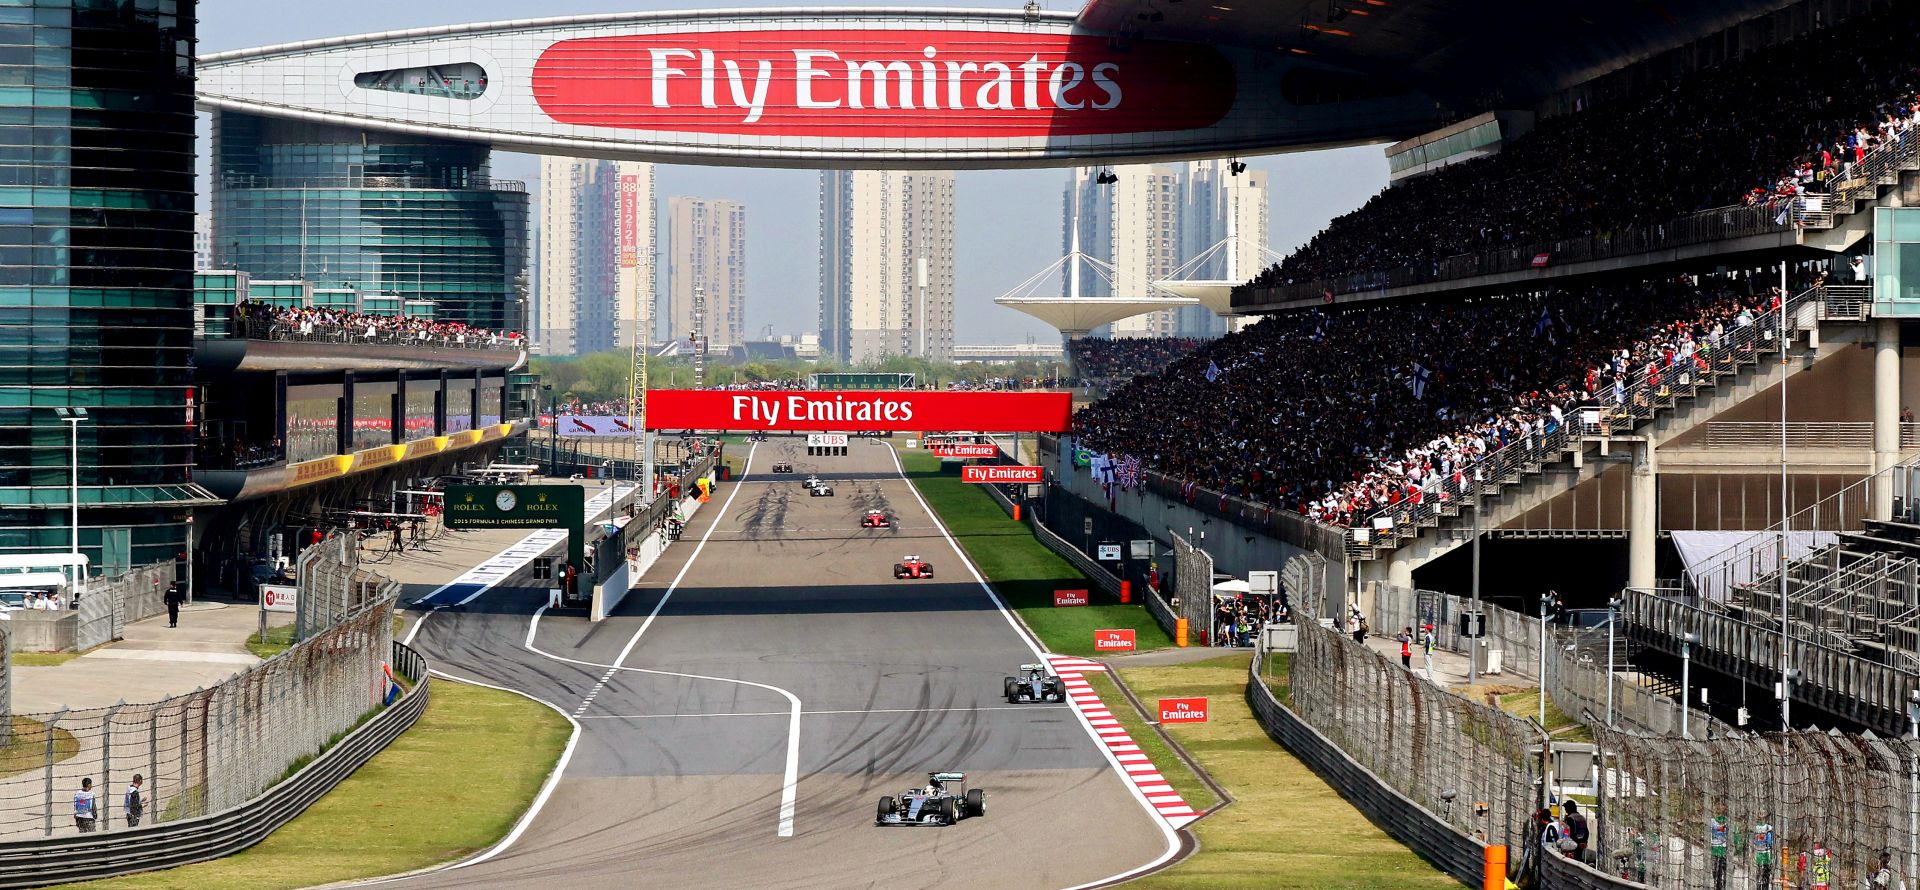 epa08212821 (FILE) - General view of the racetrack during the Chinese Formula One Grand Prix at the Shanghai International Circuit in Shanghai, China, 12 April 2015 (re-issued on 12 February 2020). The 2020 Chinese Formula One Grand Prix has been postponed due to the outbreak of the novel coronavirus (Covid-19) in China.  EPA/WU HONG *** Local Caption *** 51884414